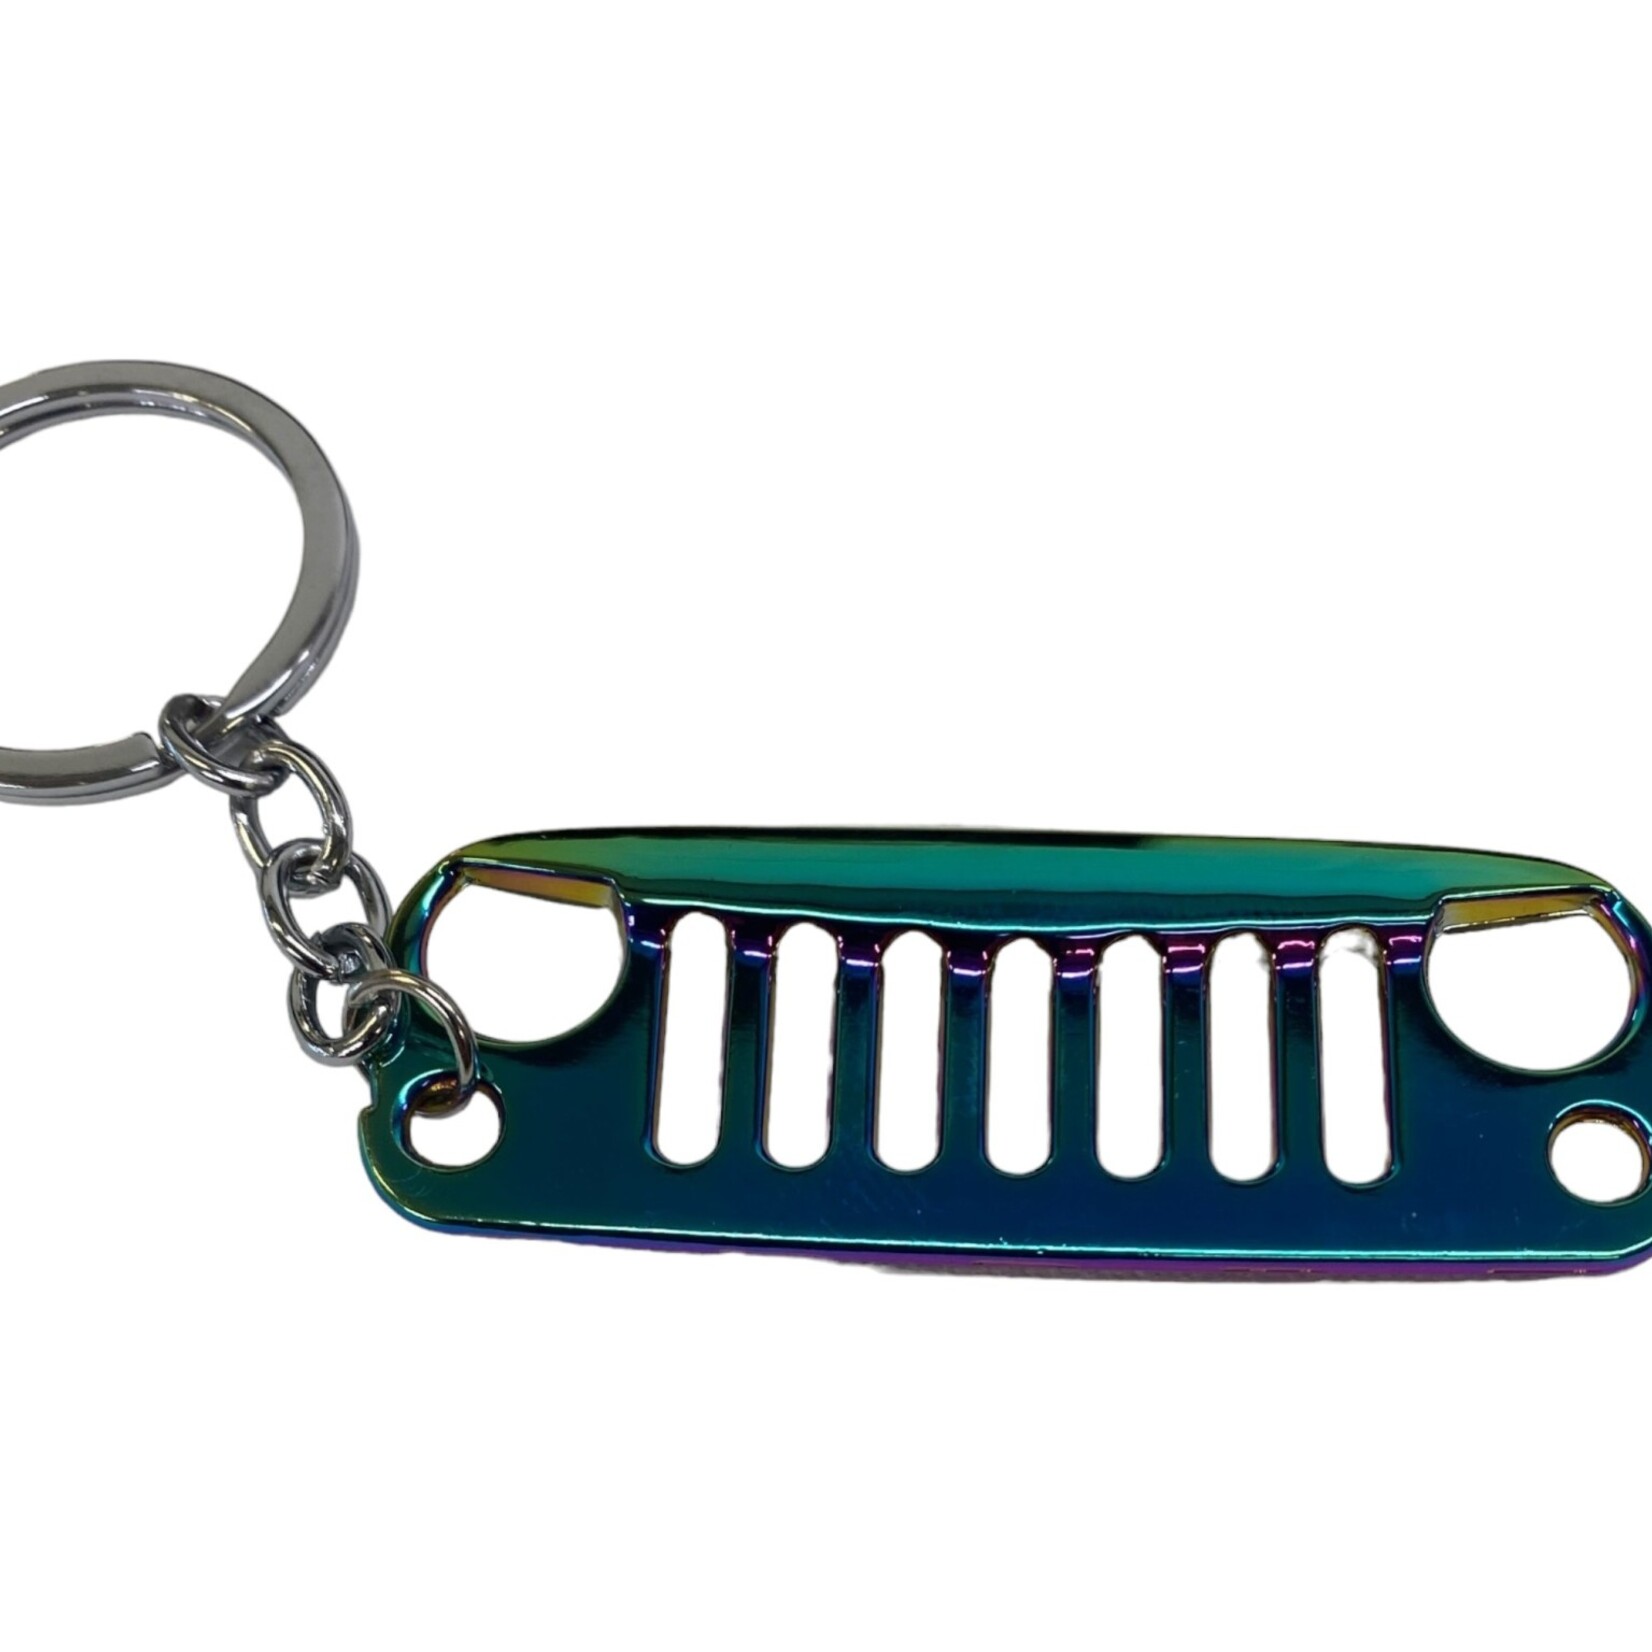 INCORRIGIBLE MOTORSPORTS ANGRY GRILL KEYCHAIN